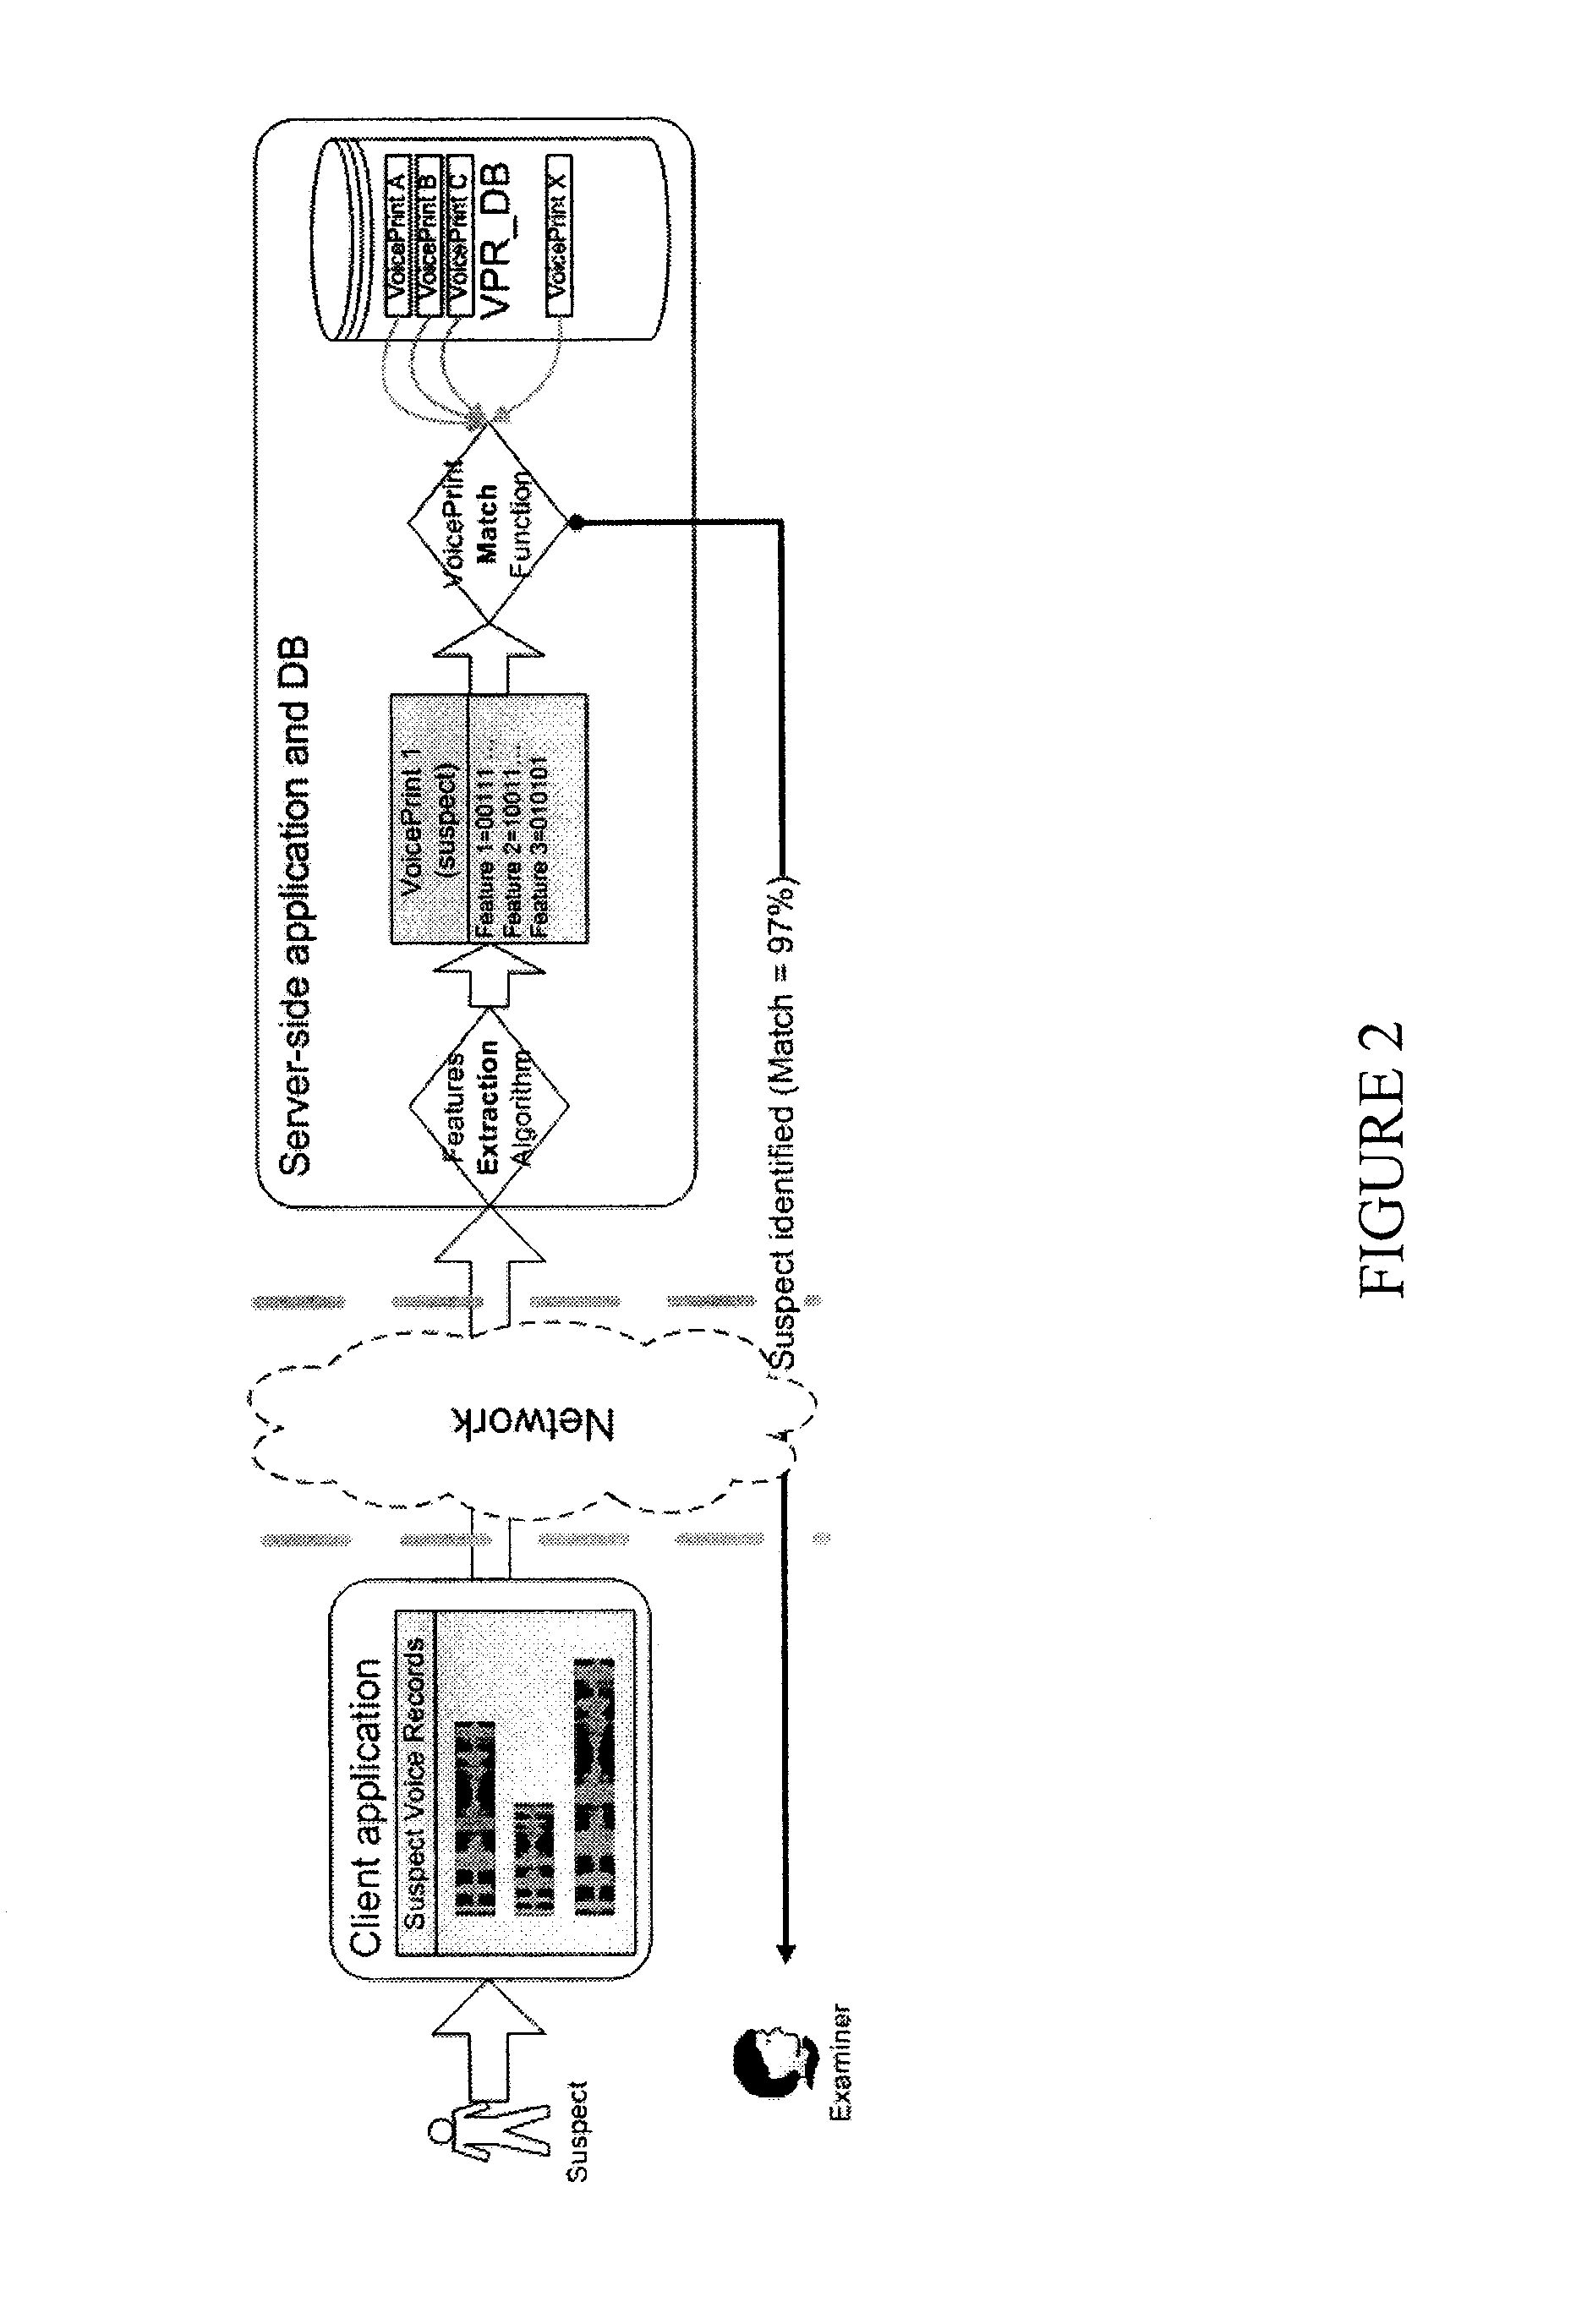 Voice print recognition software system for voice identification and matching